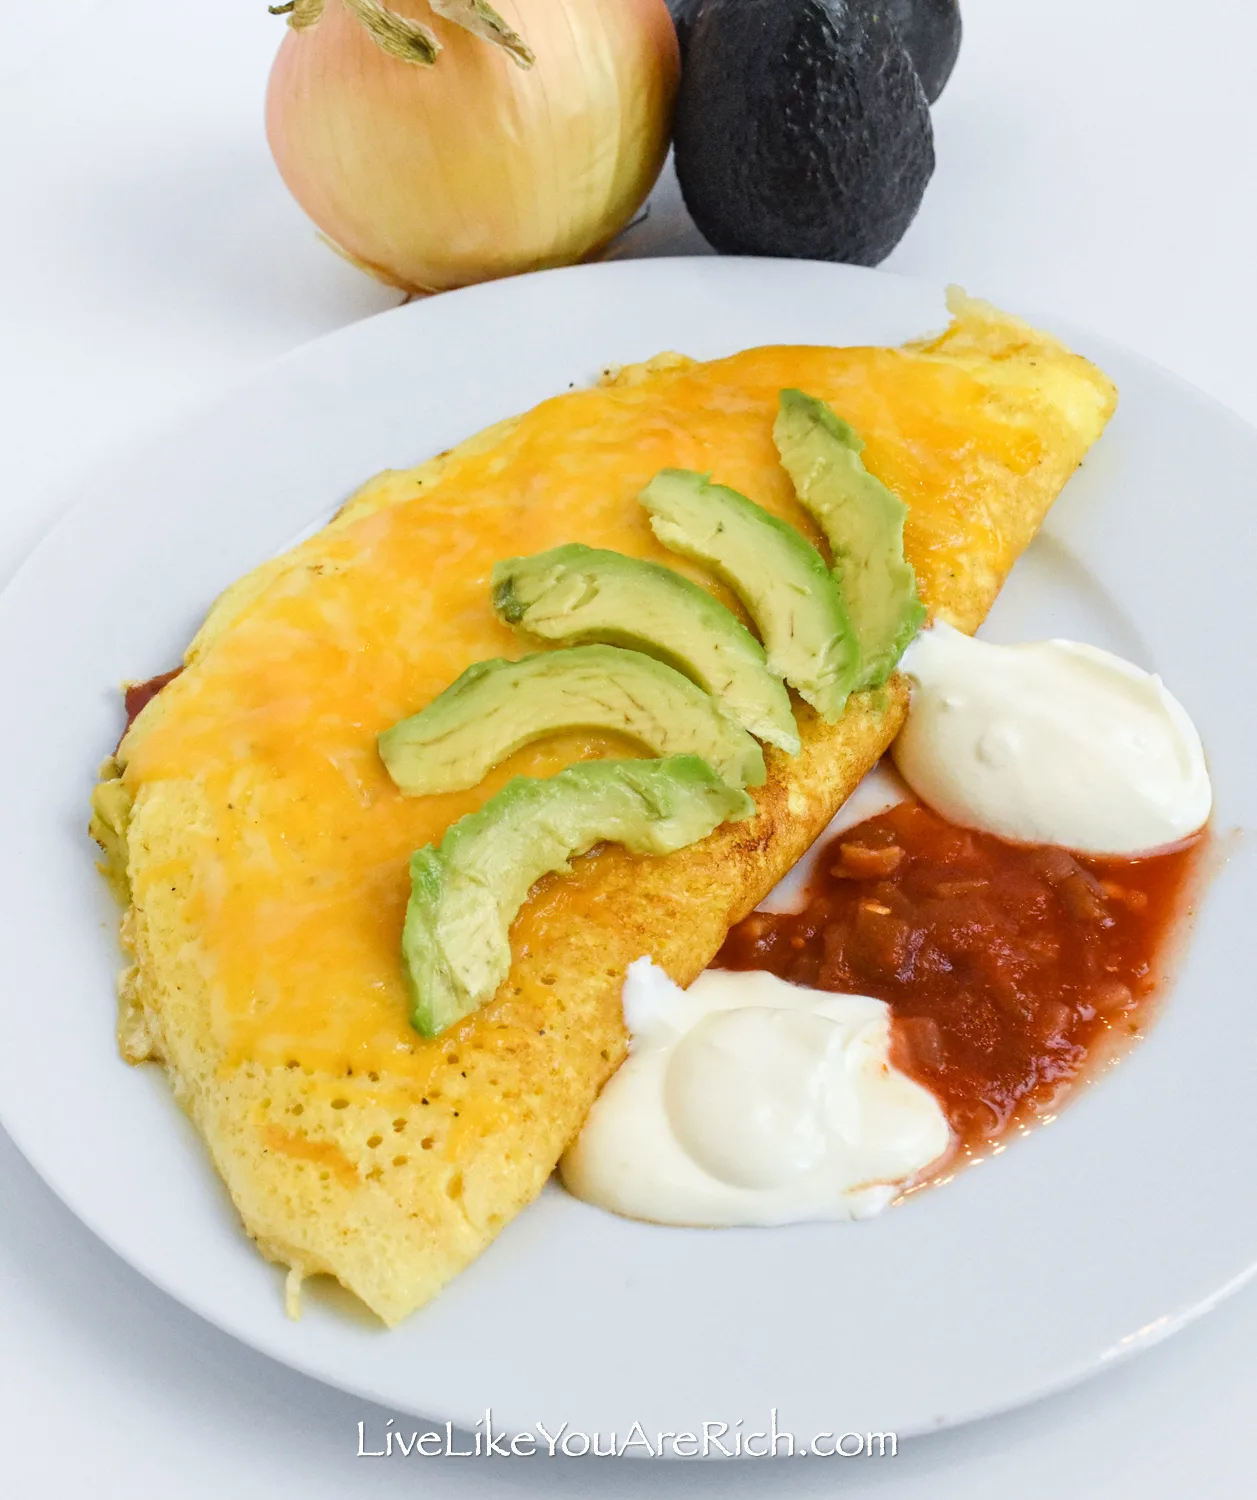 Restaurant style omelette in a plate